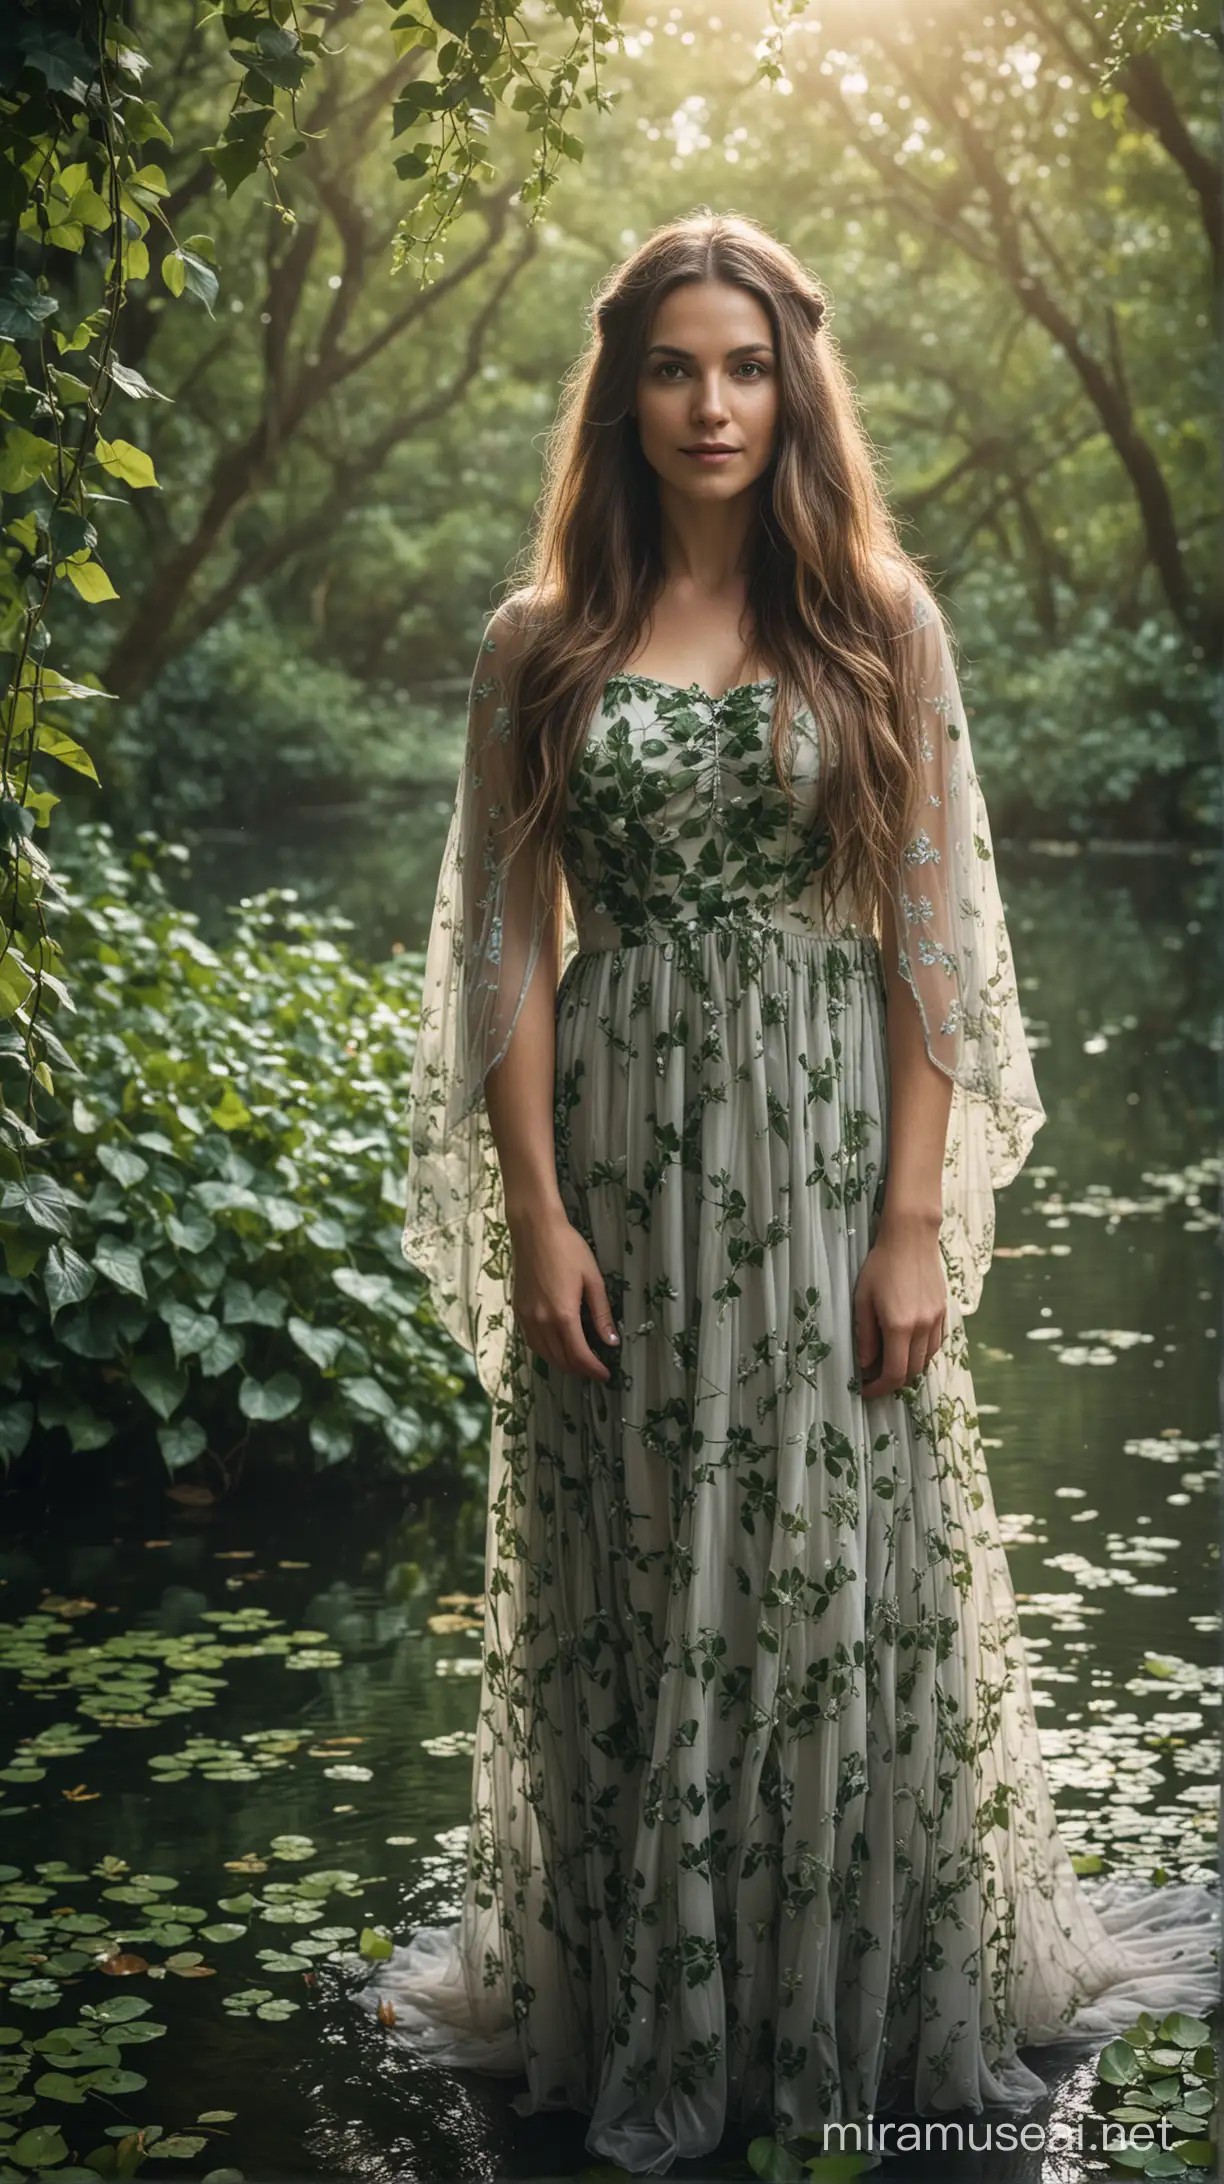 Portrait photo of a 30-year old caucasian woman with long hair. Subject has a peaceful expression, and is staring directly at the camera. Subject is wearing a dress made of ivy vines and leaves. Mythical misty forest surrounded by a canopy of flowering trees. Magical pond. High definition, raw style.